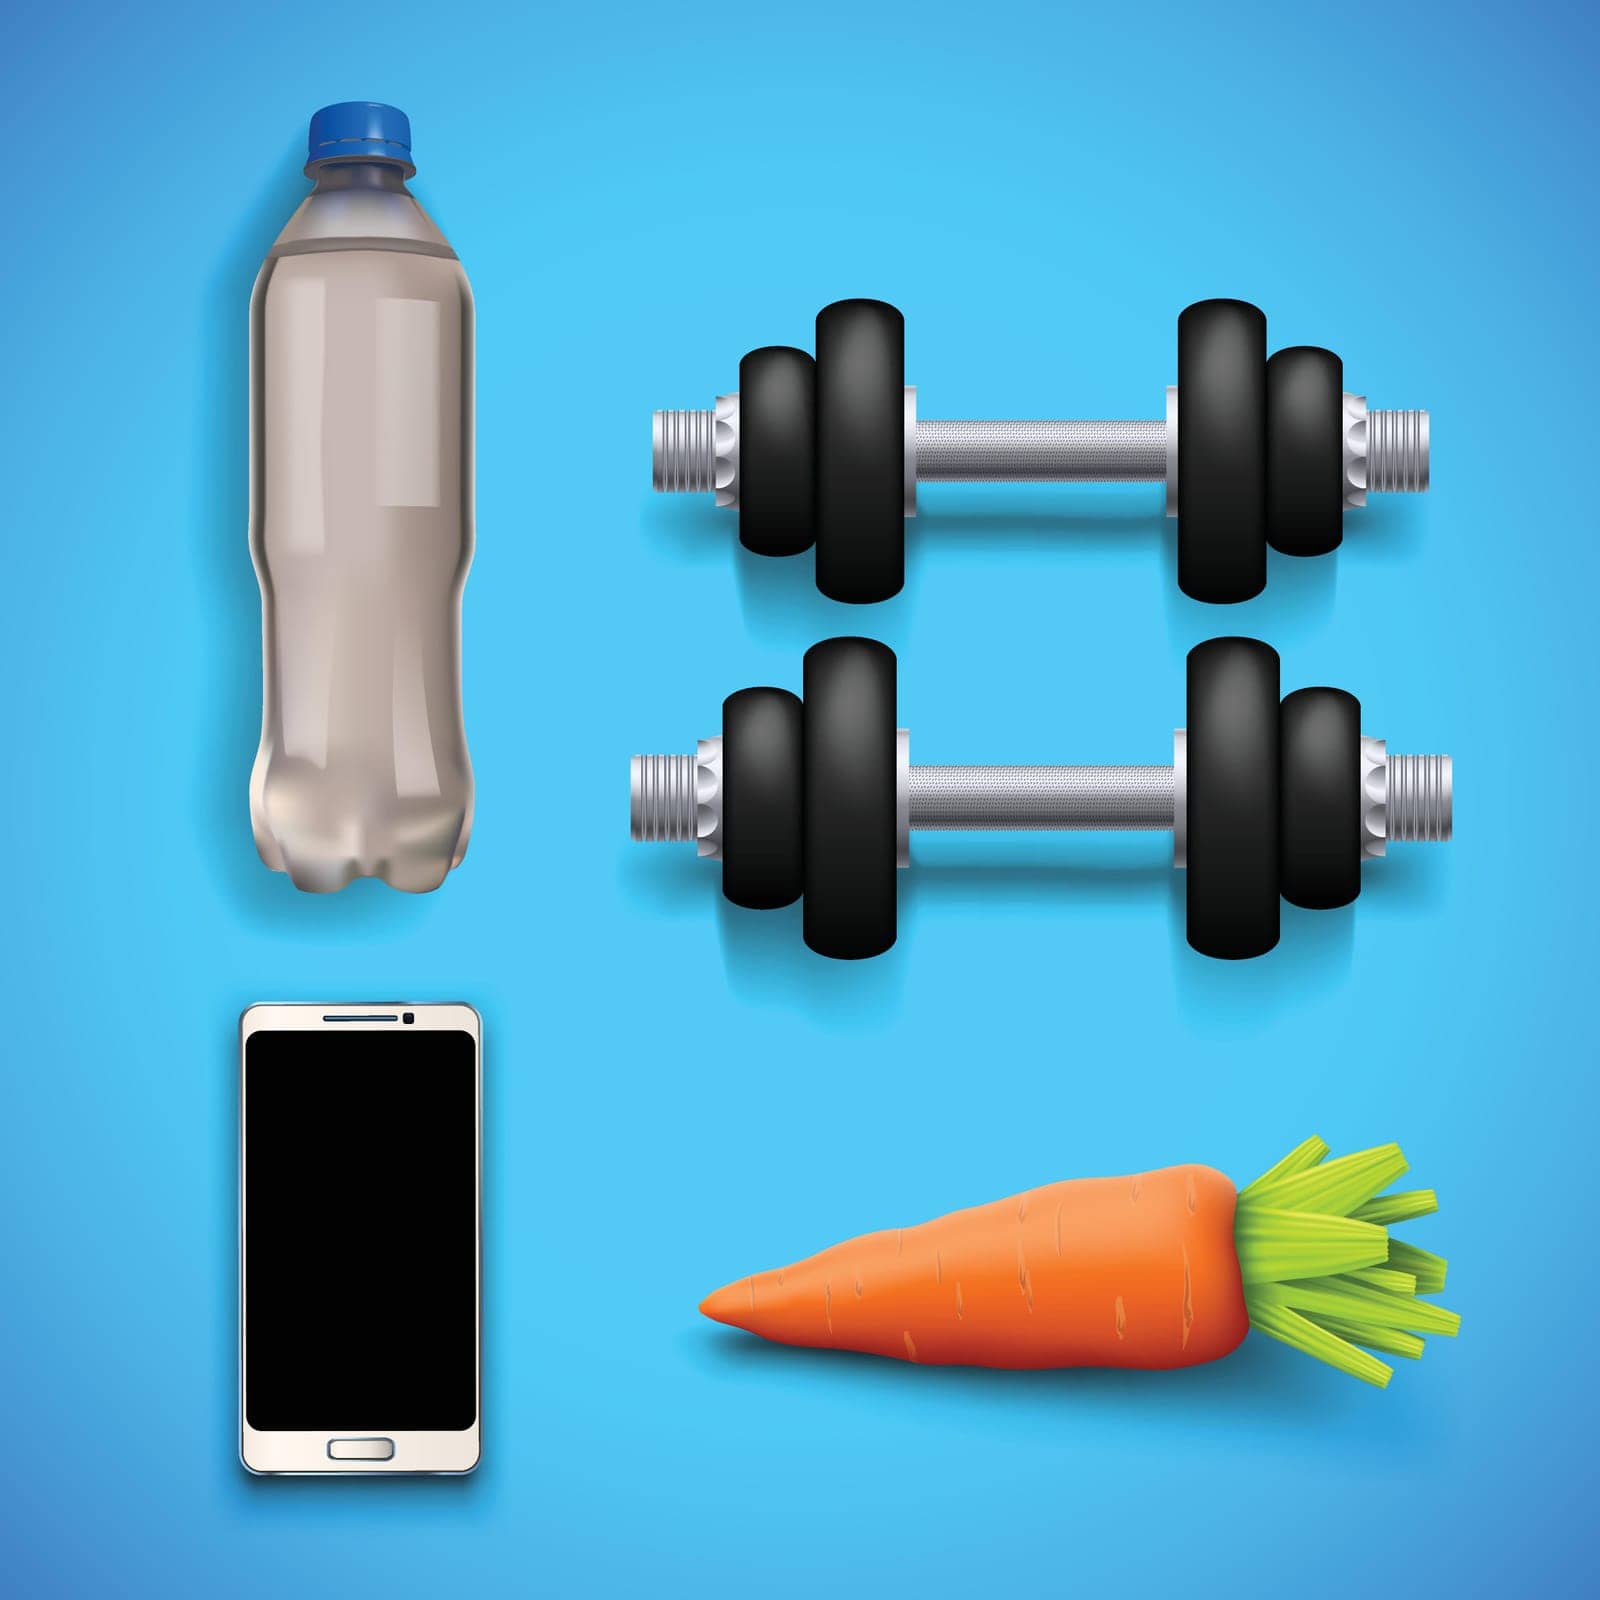 fitness equipment on blue by IfH